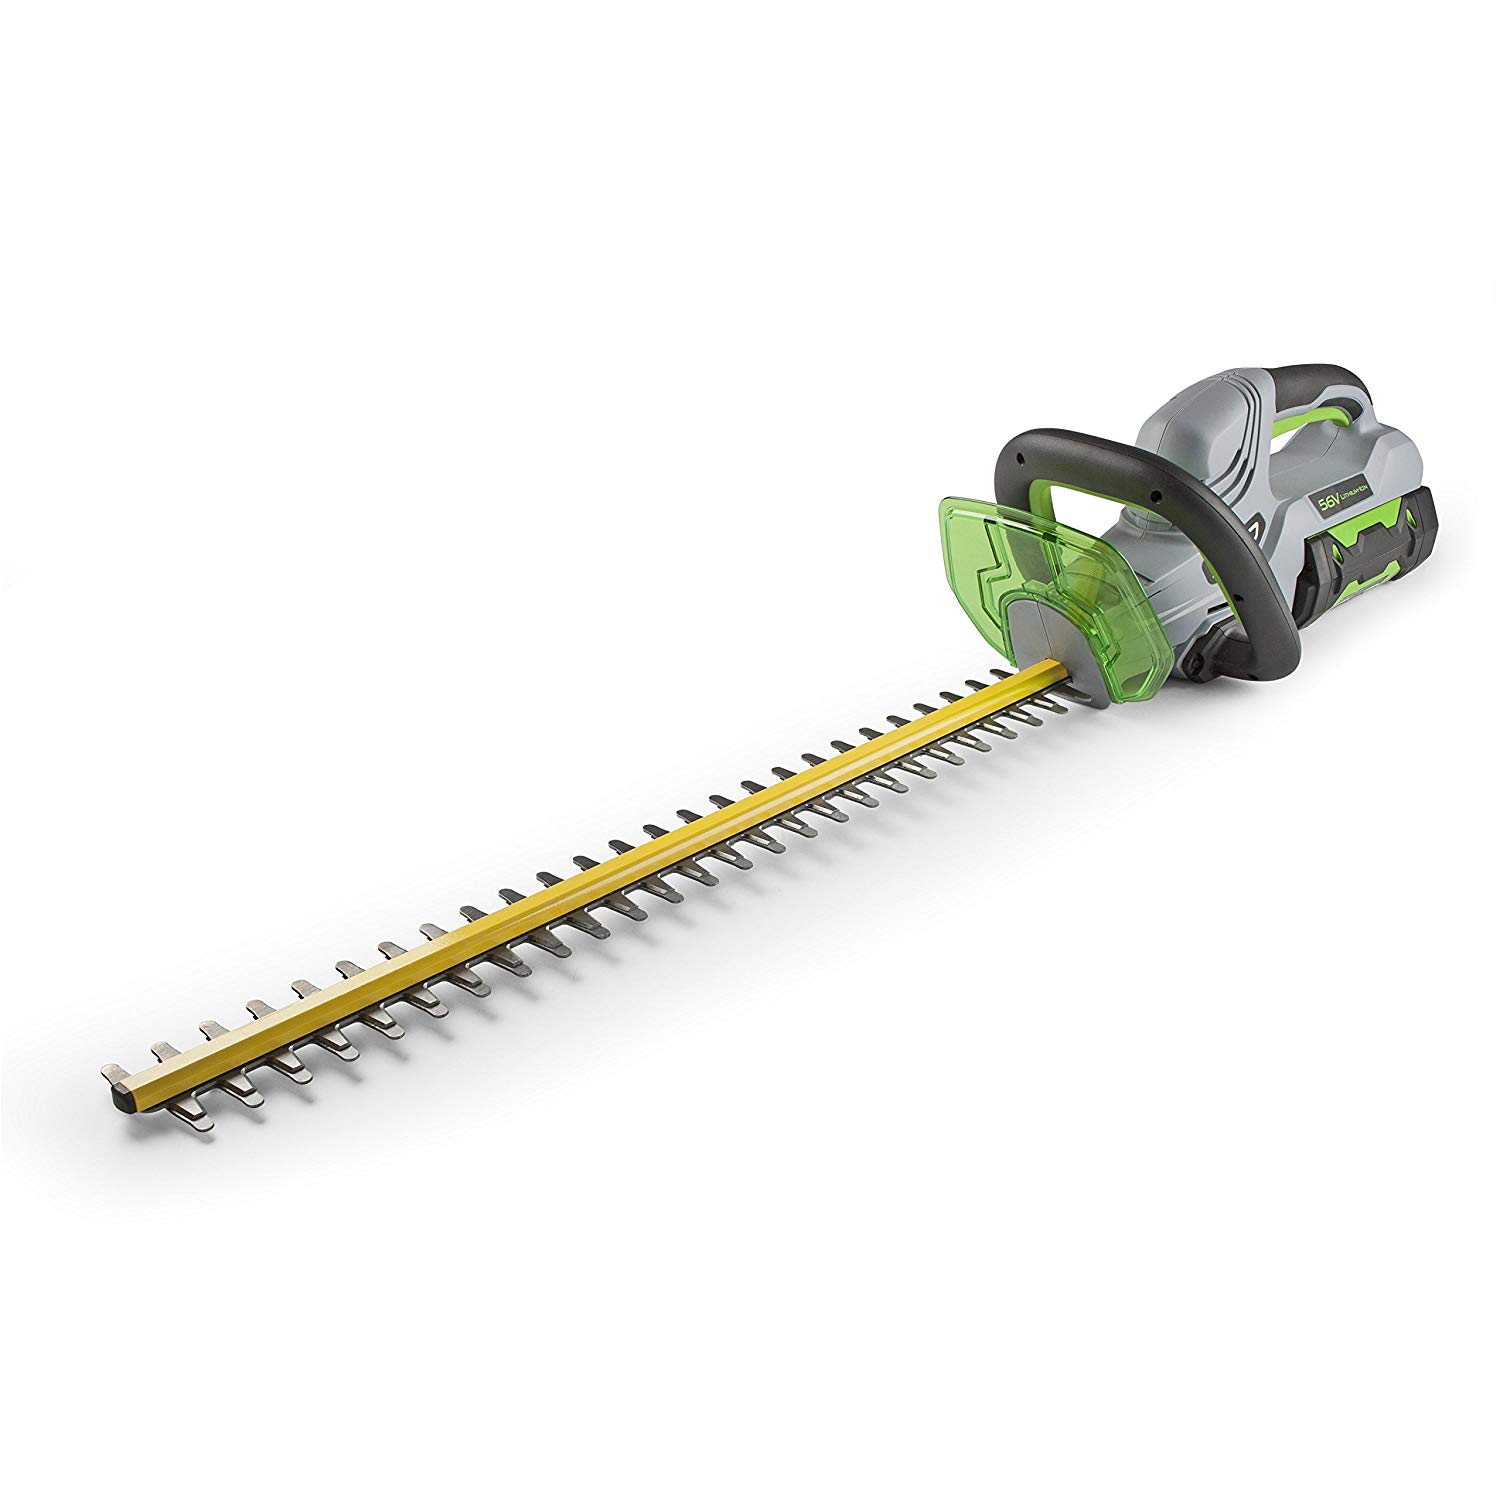 EGO Power+ 24-inch Hedge Trimmer